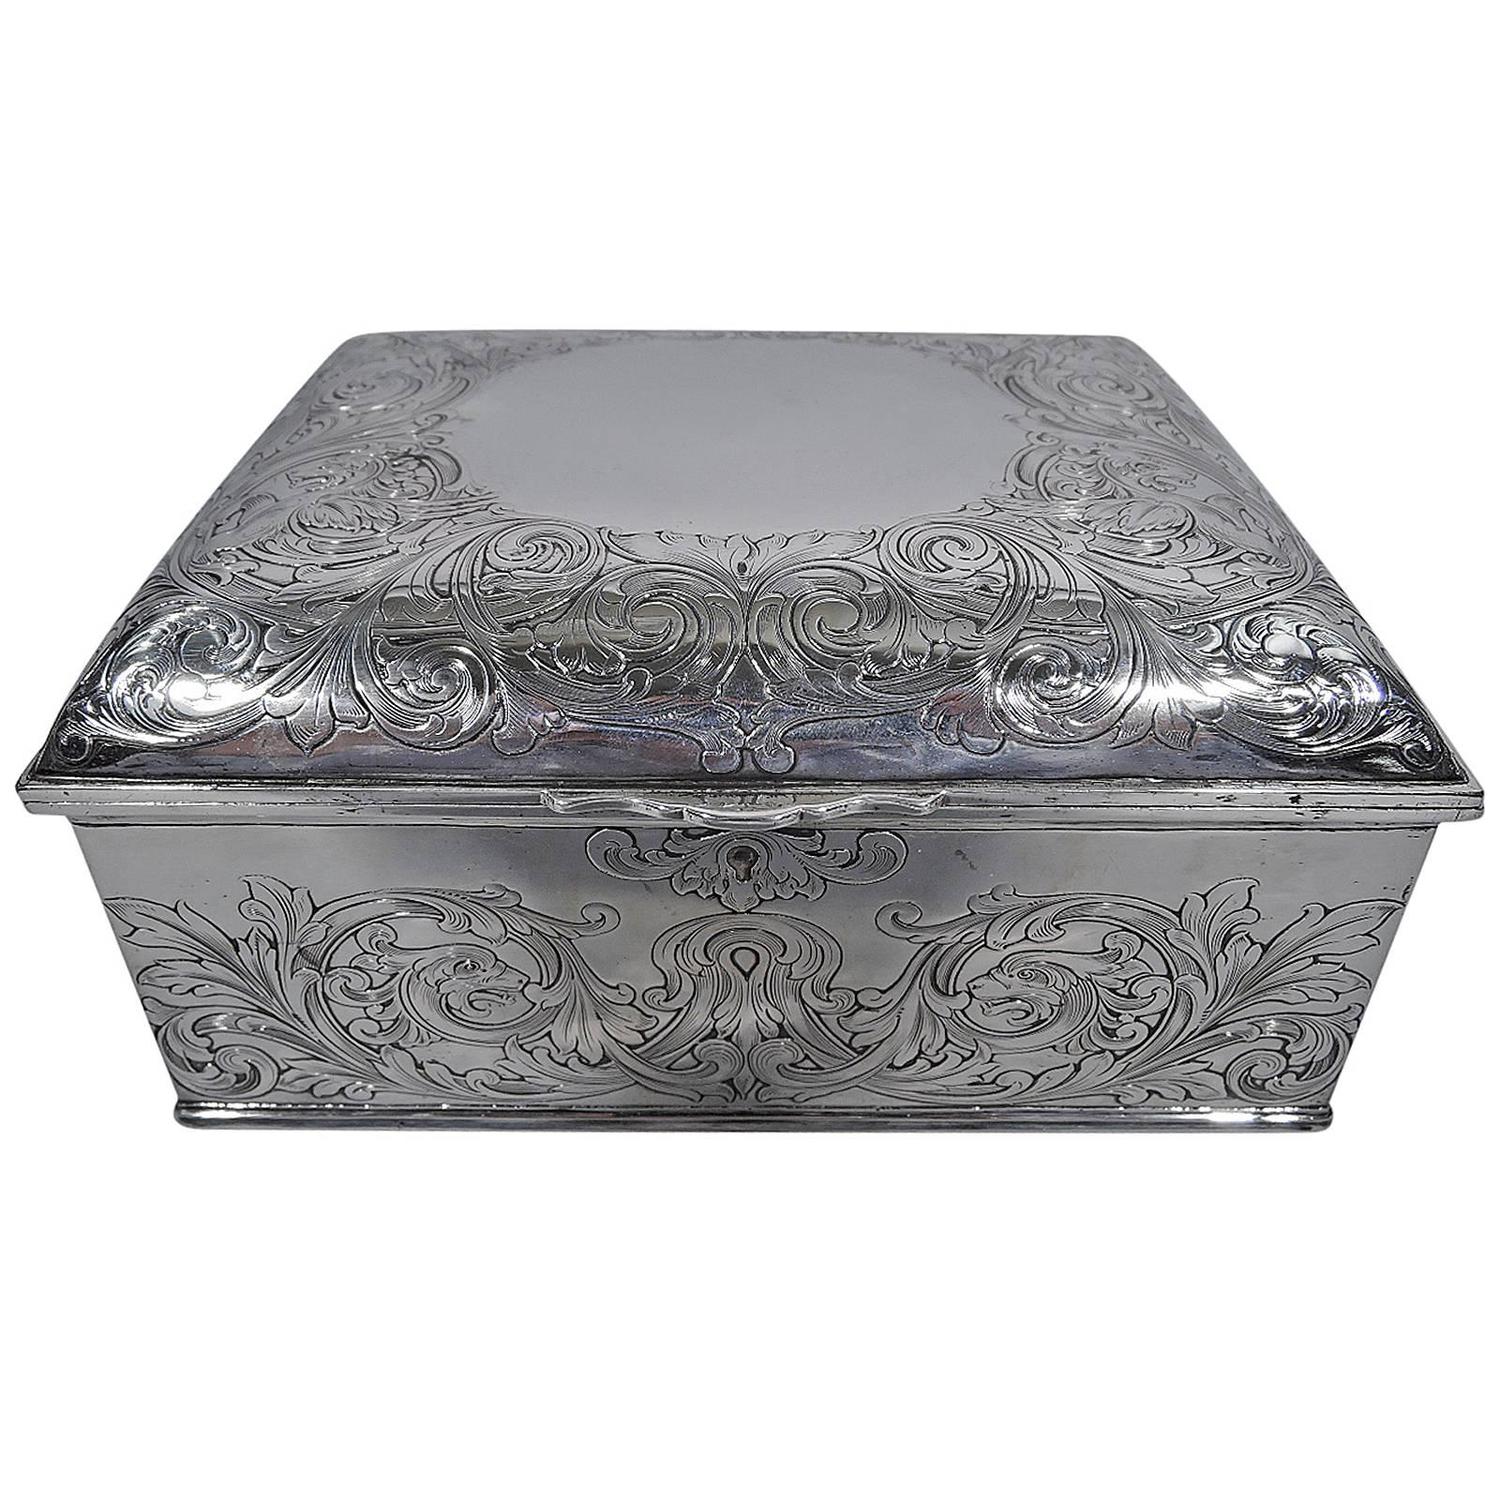 Antique Gorham Sterling Silver Jewelry Box For Sale At 1stdibs